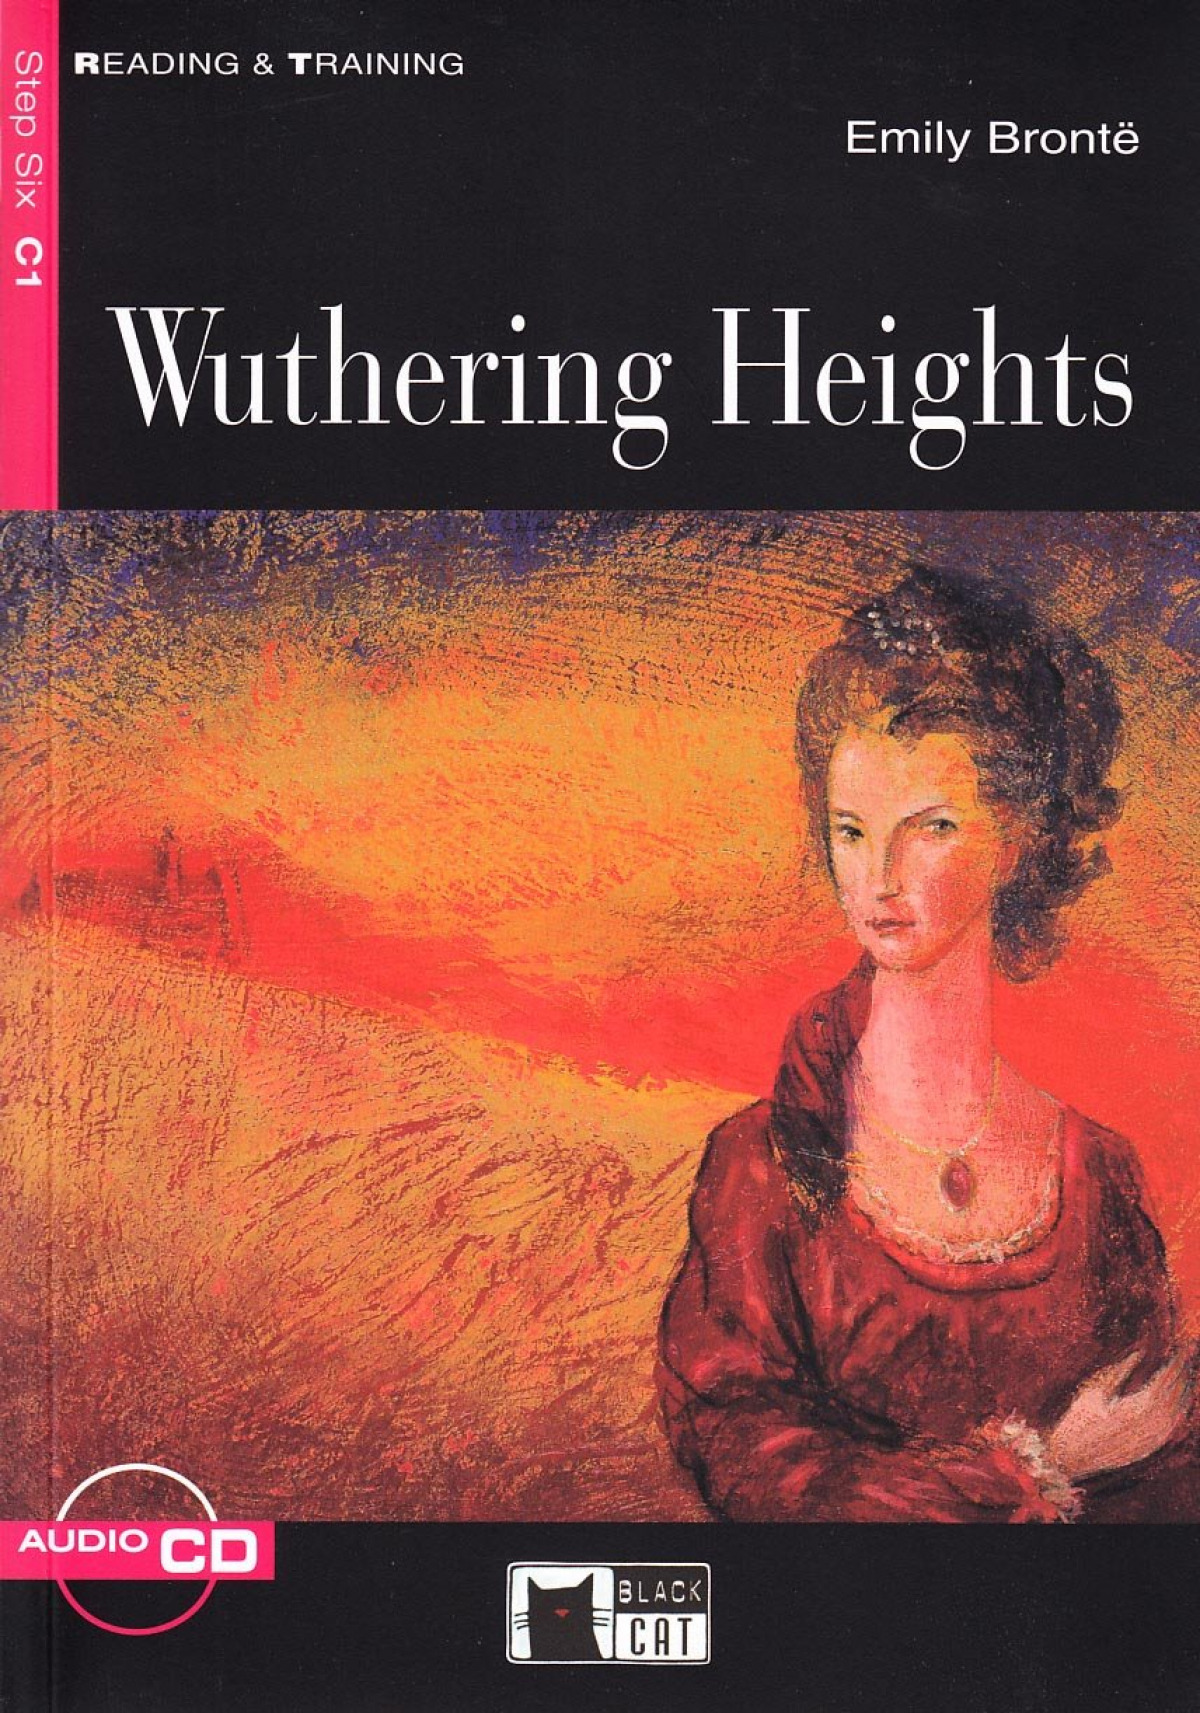 Wuthering heights. book + cd - Bronte, Emily